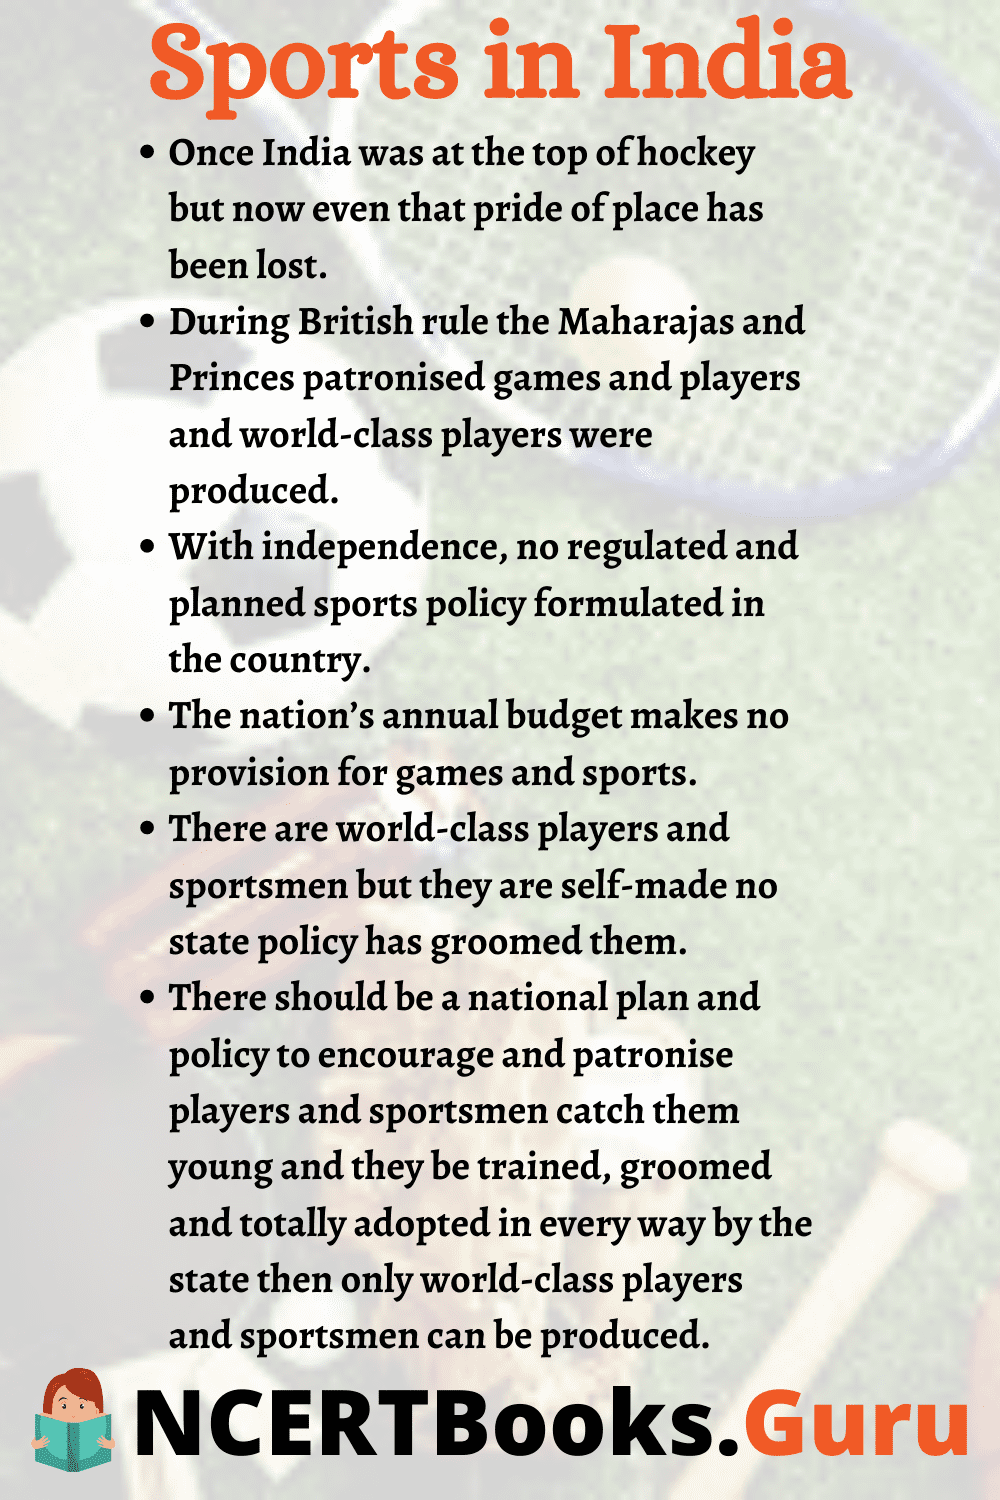 Sports in India Essay